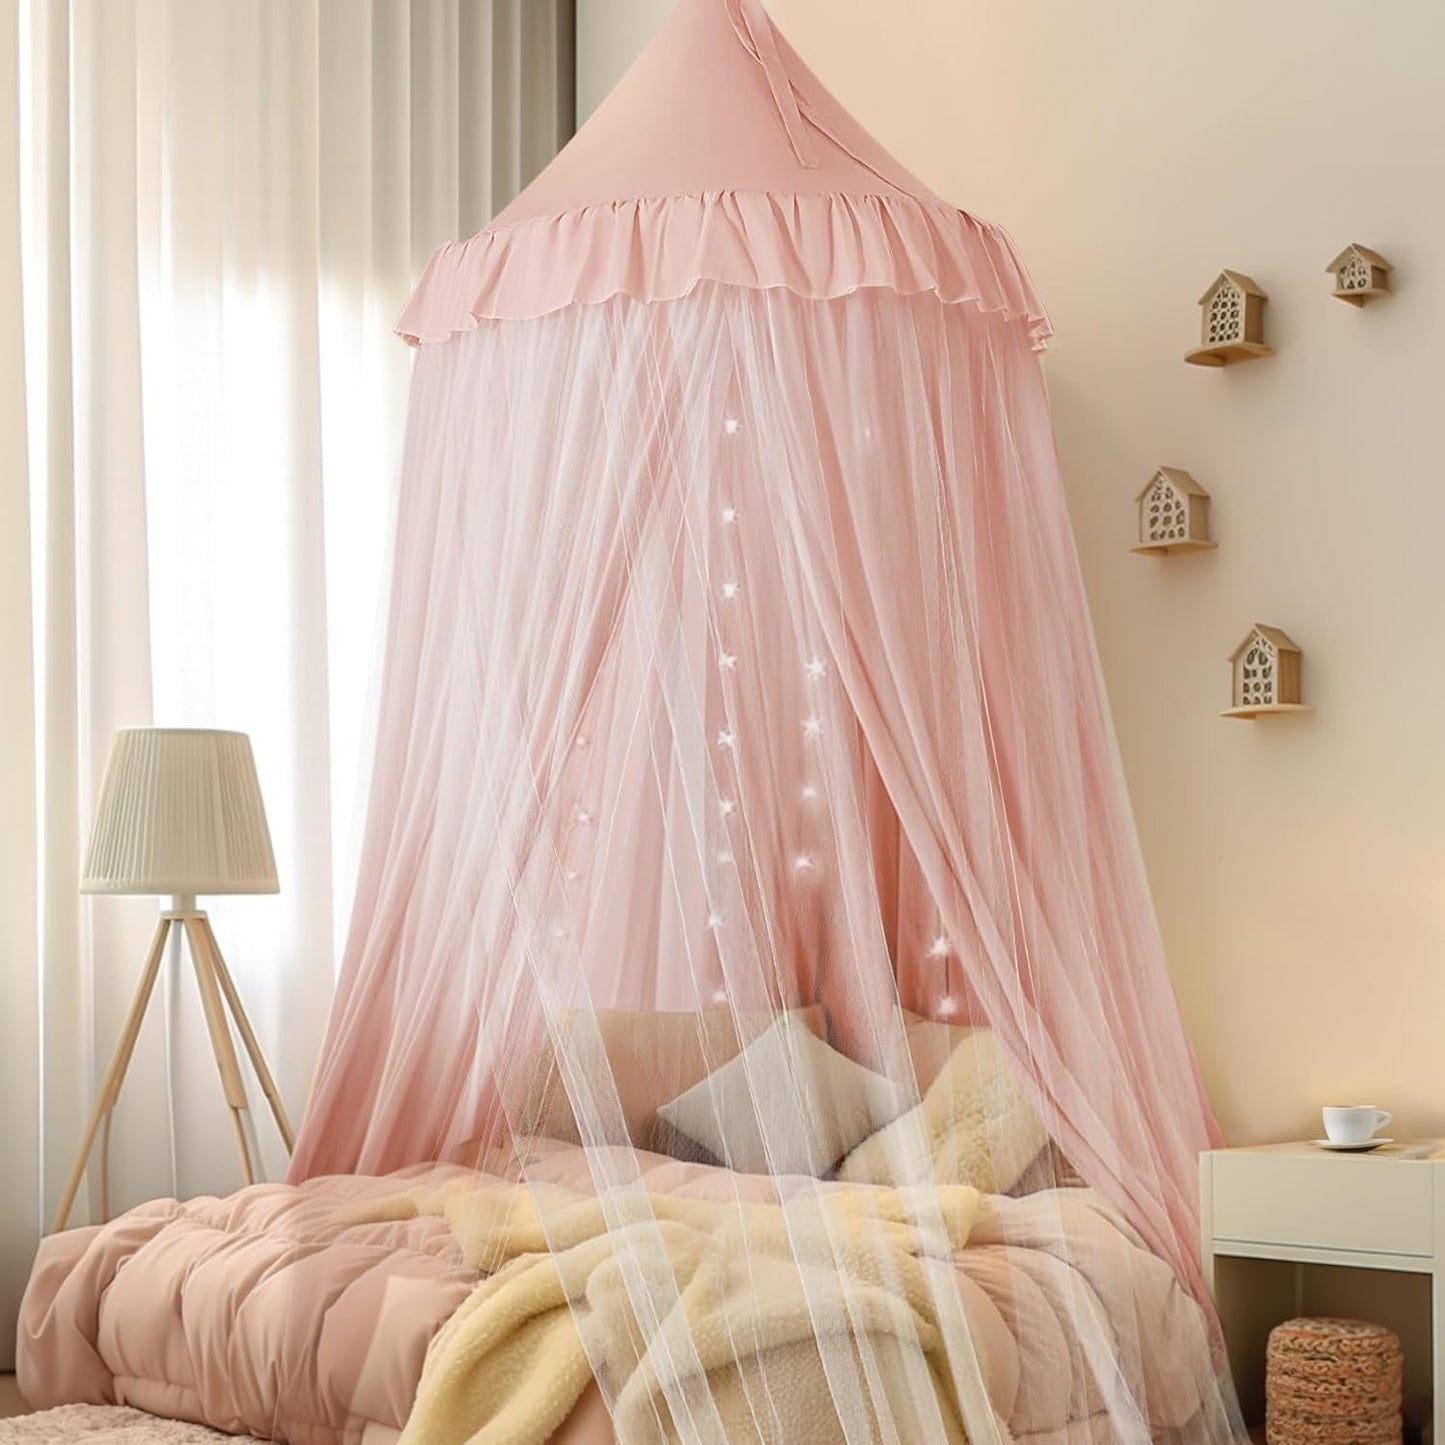 Bed Canopy with Star Lights, Double Layer Canopy for Bed